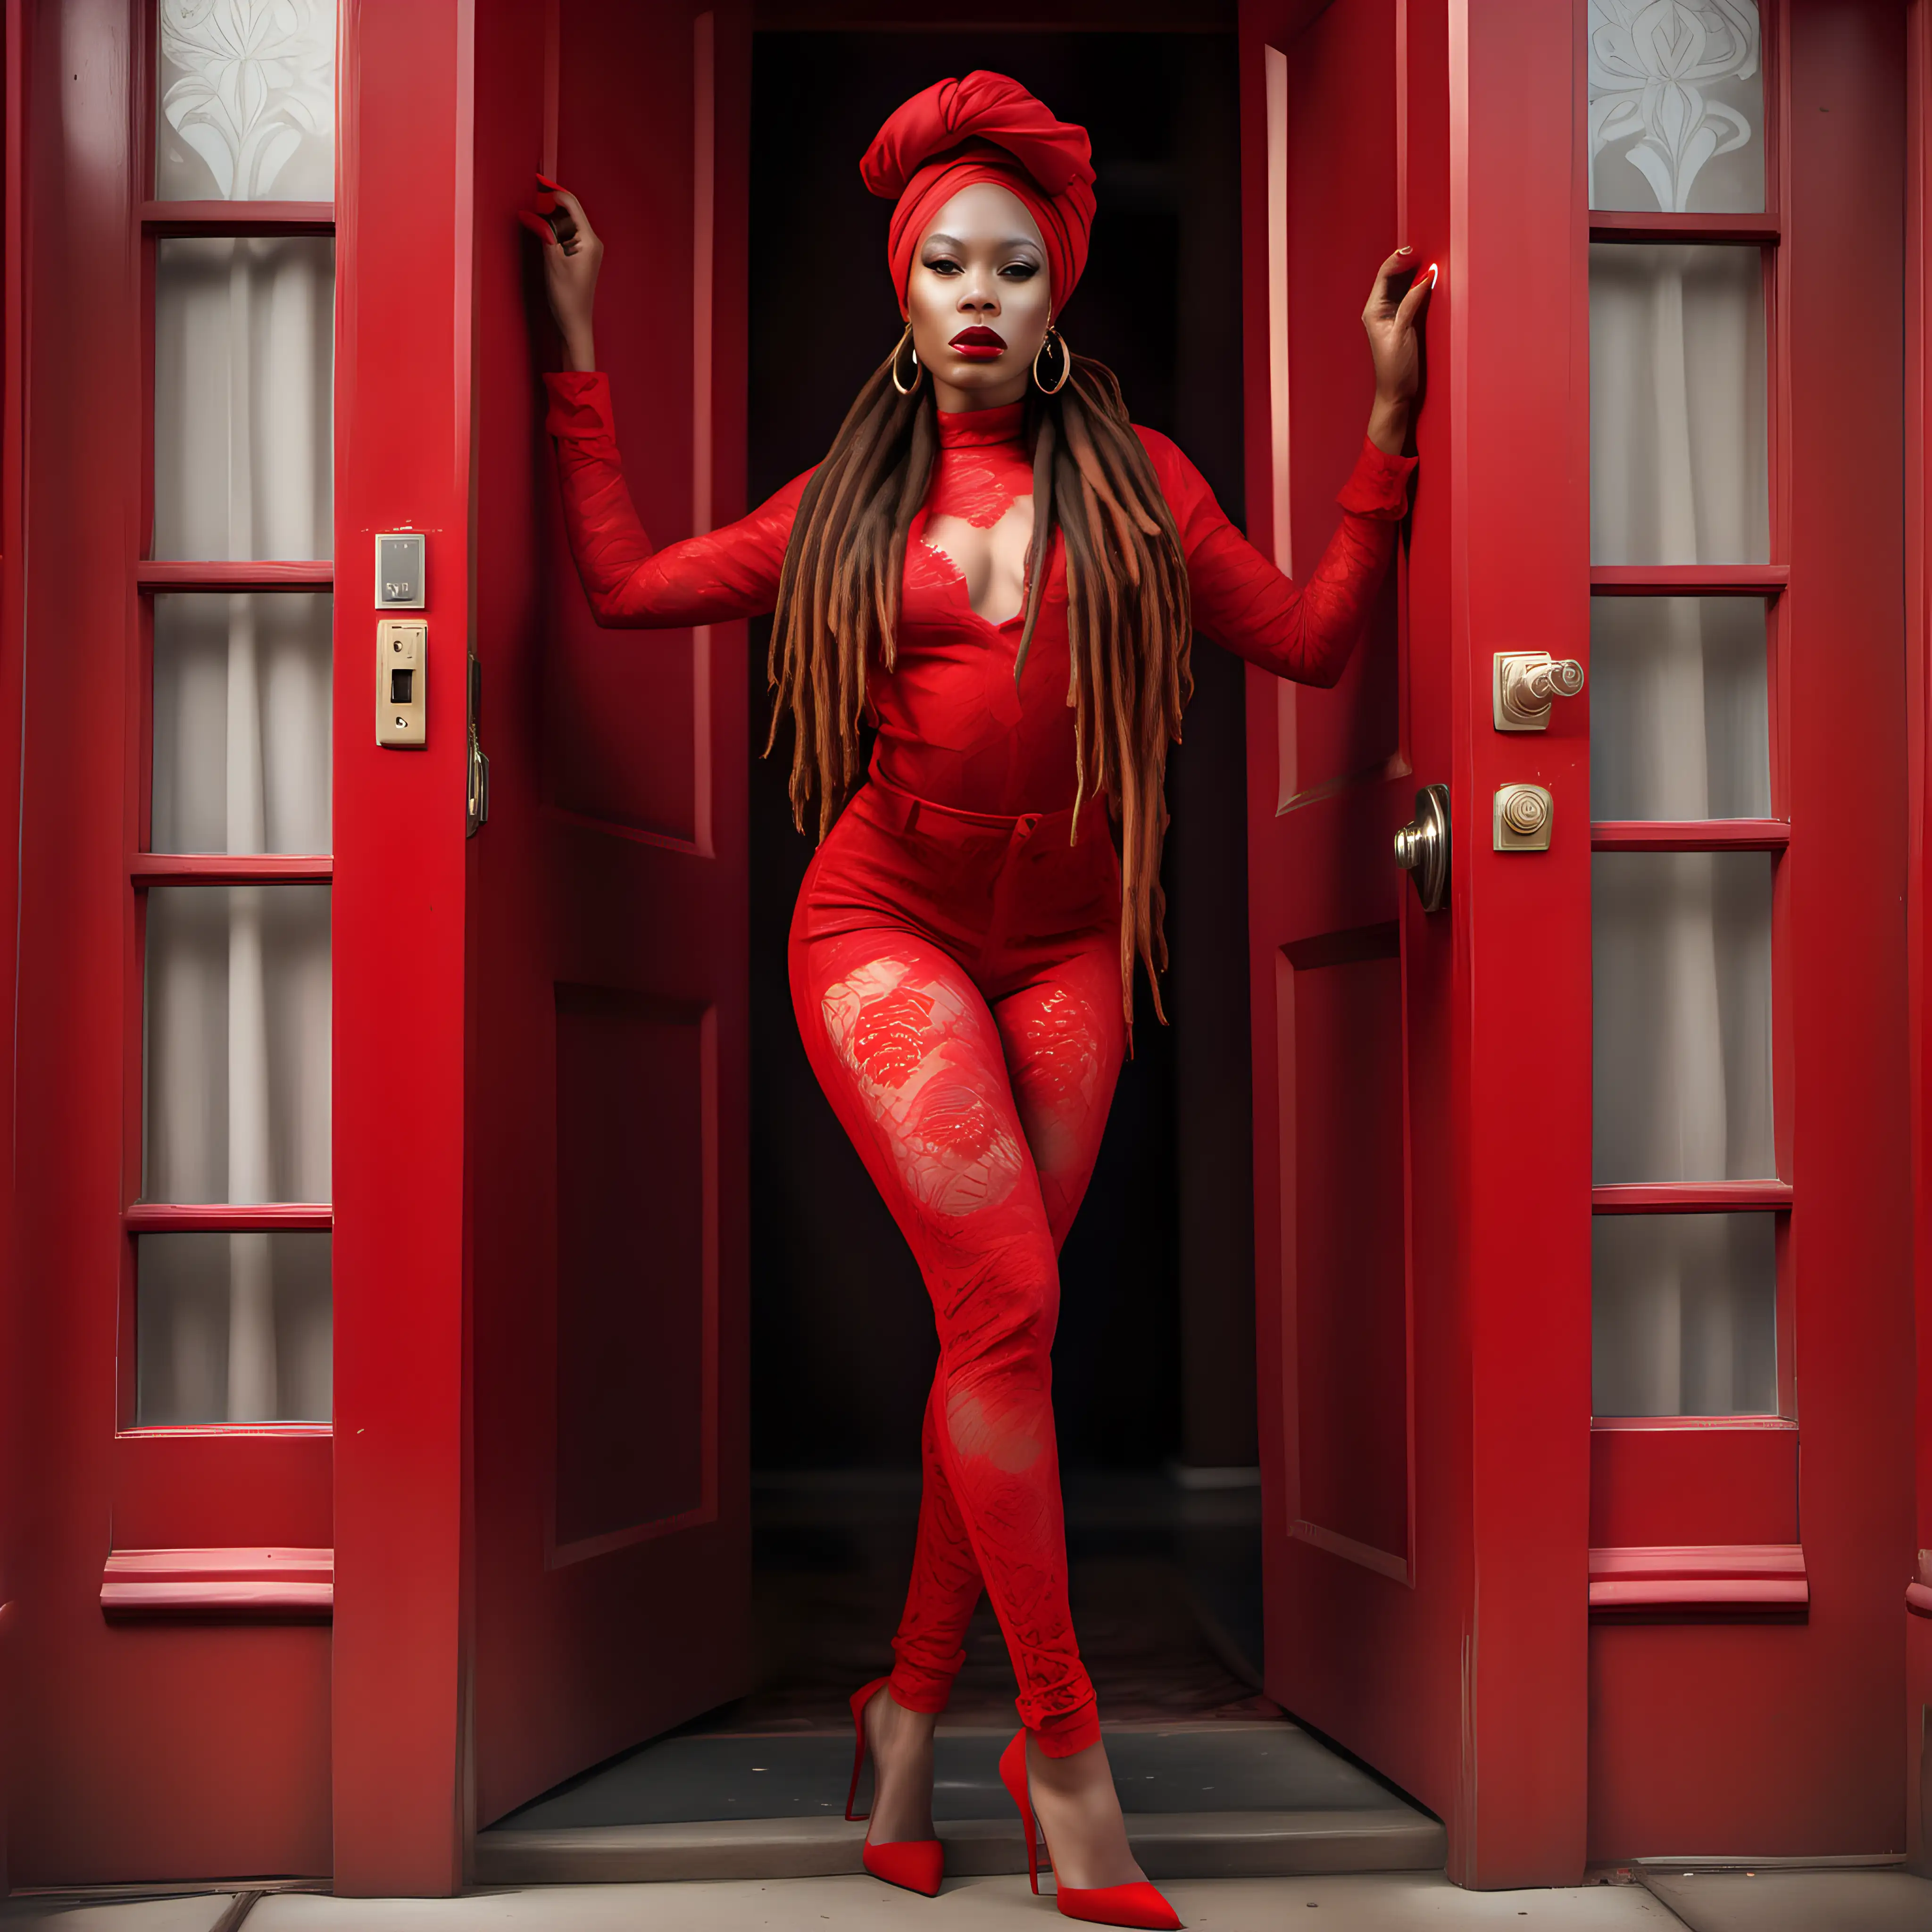 Create a full body view hyper realistic image of an African American woman  long dreadlocks  with red head wrap , brown eyes with flawless makeup, gold hoop earrings red lipstick and red nails , dressed in a red lace bodysuit band red heels standing in a red doorway 